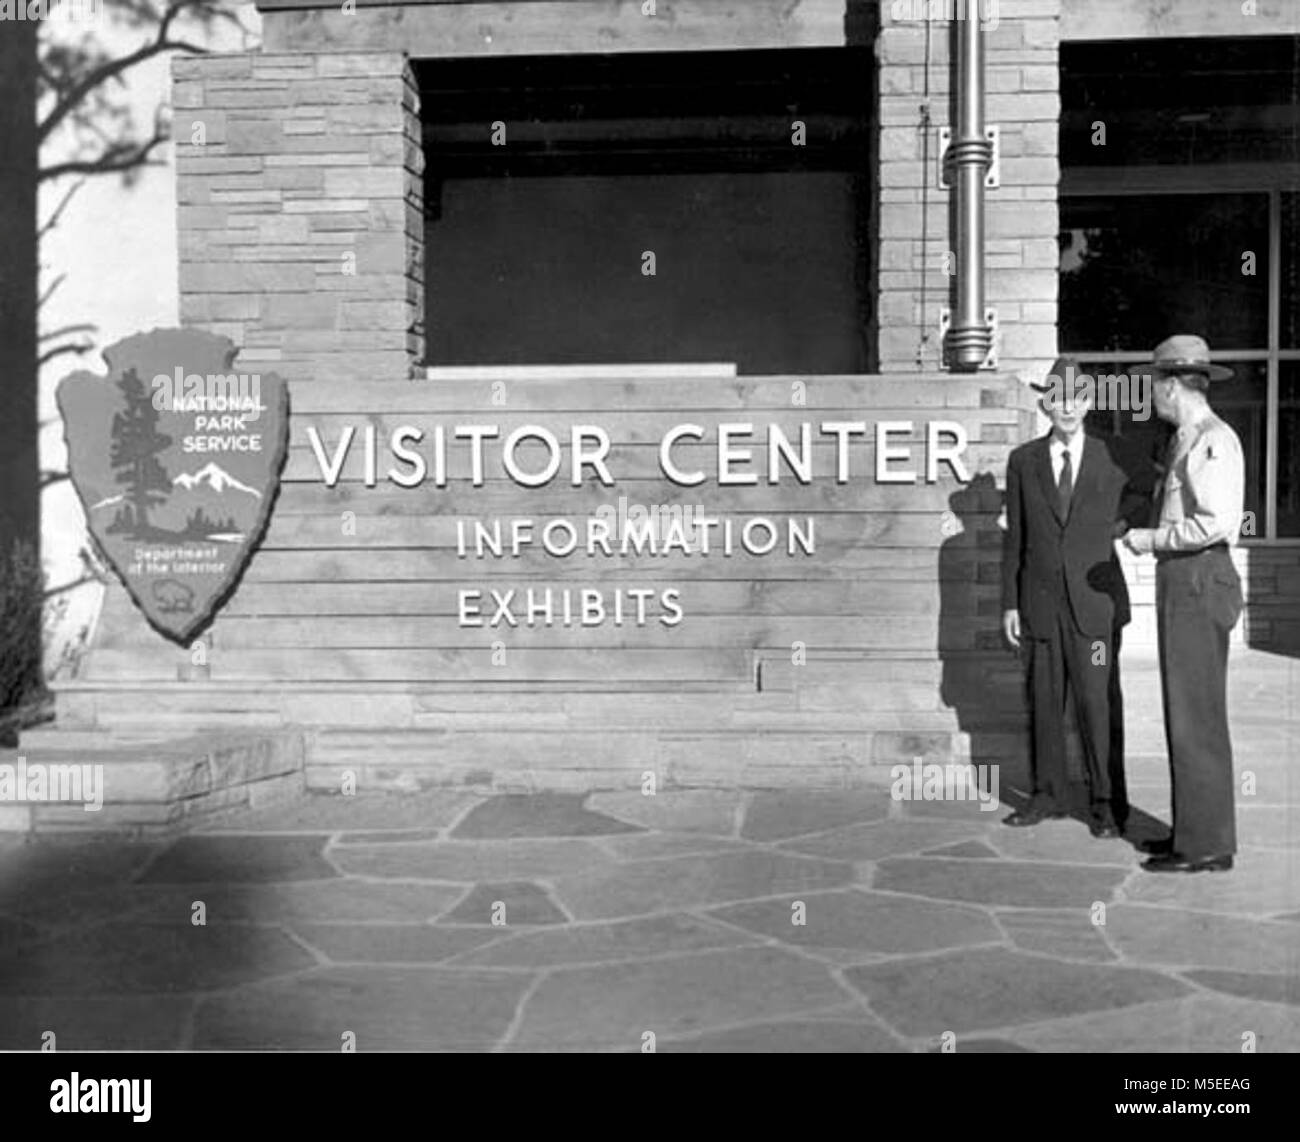 Grand Canyon- Carl Hayden   SENATOR CARL HAYDEN AND PARK SUPT. JOHN MCLAUGHLIN IN FRONT OF VISITOR CENTER. THE SENATOR HAS LONG BEEN A SUBSTANTIAL SUPPORTER OF THE PARK AND WAS PLEASED ON THIS OCCASION TO INSPECT A NUMBER OF PHYSICAL IMPROVEMENTS IN WHICH HE HAD PERSONAL INTEREST. WITH HIM WERE HIS ADMINISTRATIVE ASSISTANT PAUL K. EATON AND STAFF ASSISTANT ROY OLSON. MISSION 66 ERA. 17 SEPT 1958. , LEDING. Stock Photo